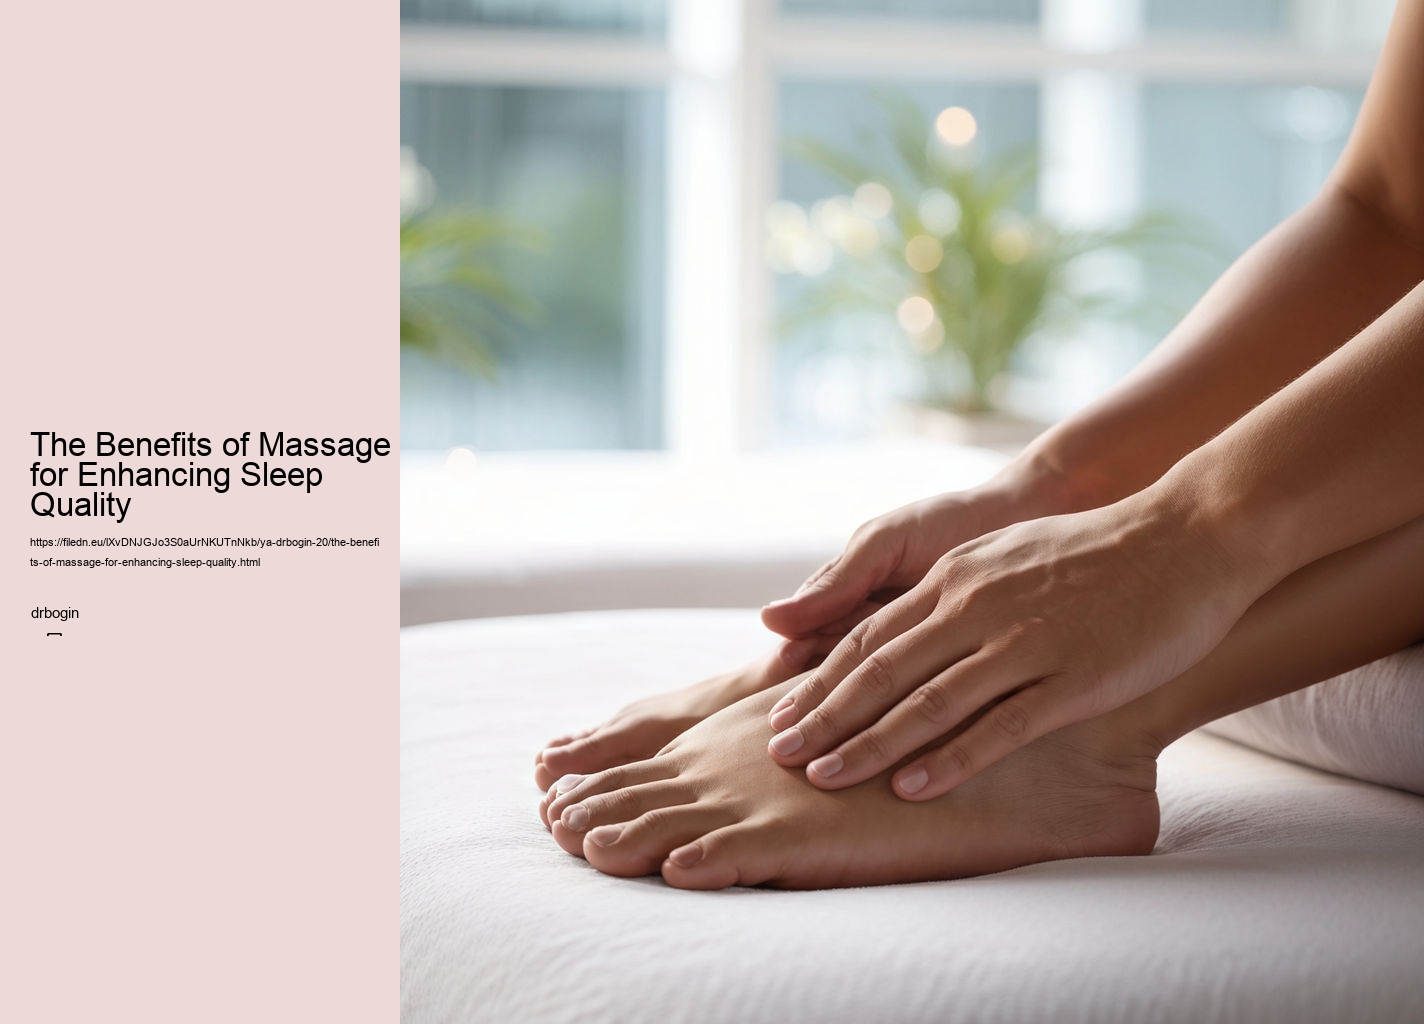 The Benefits of Massage for Enhancing Sleep Quality